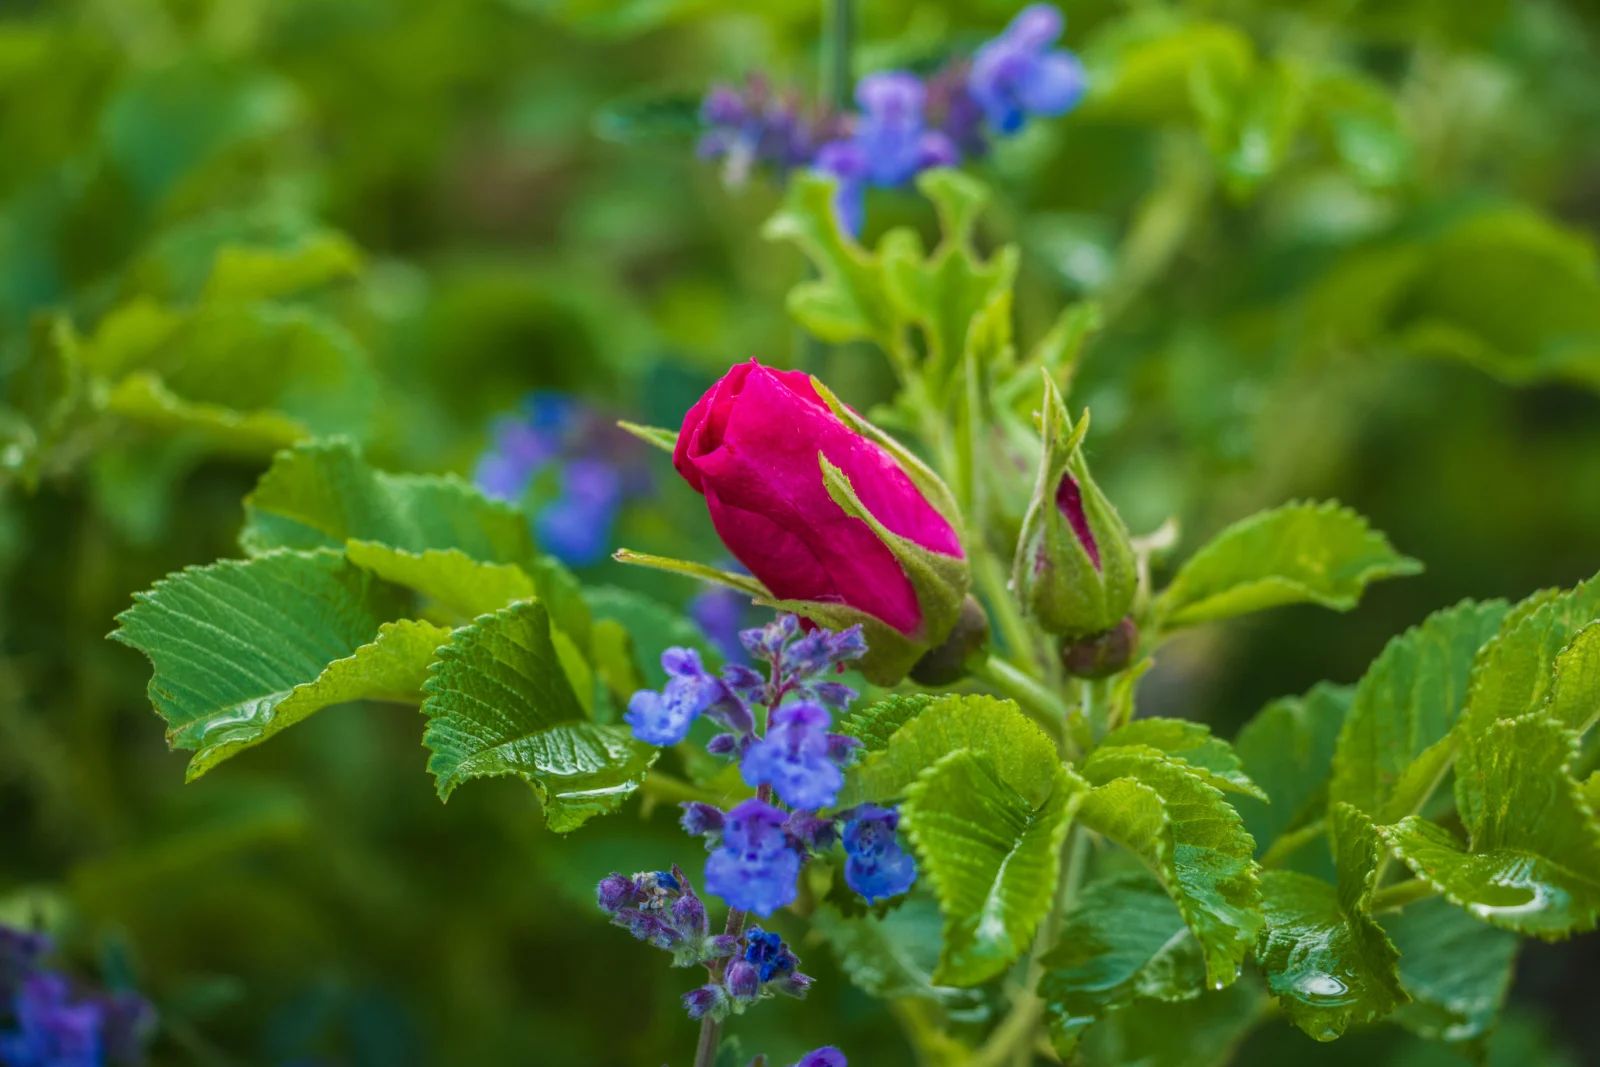 Red rosehip or dog-rose and lavender catmint flowers in garden